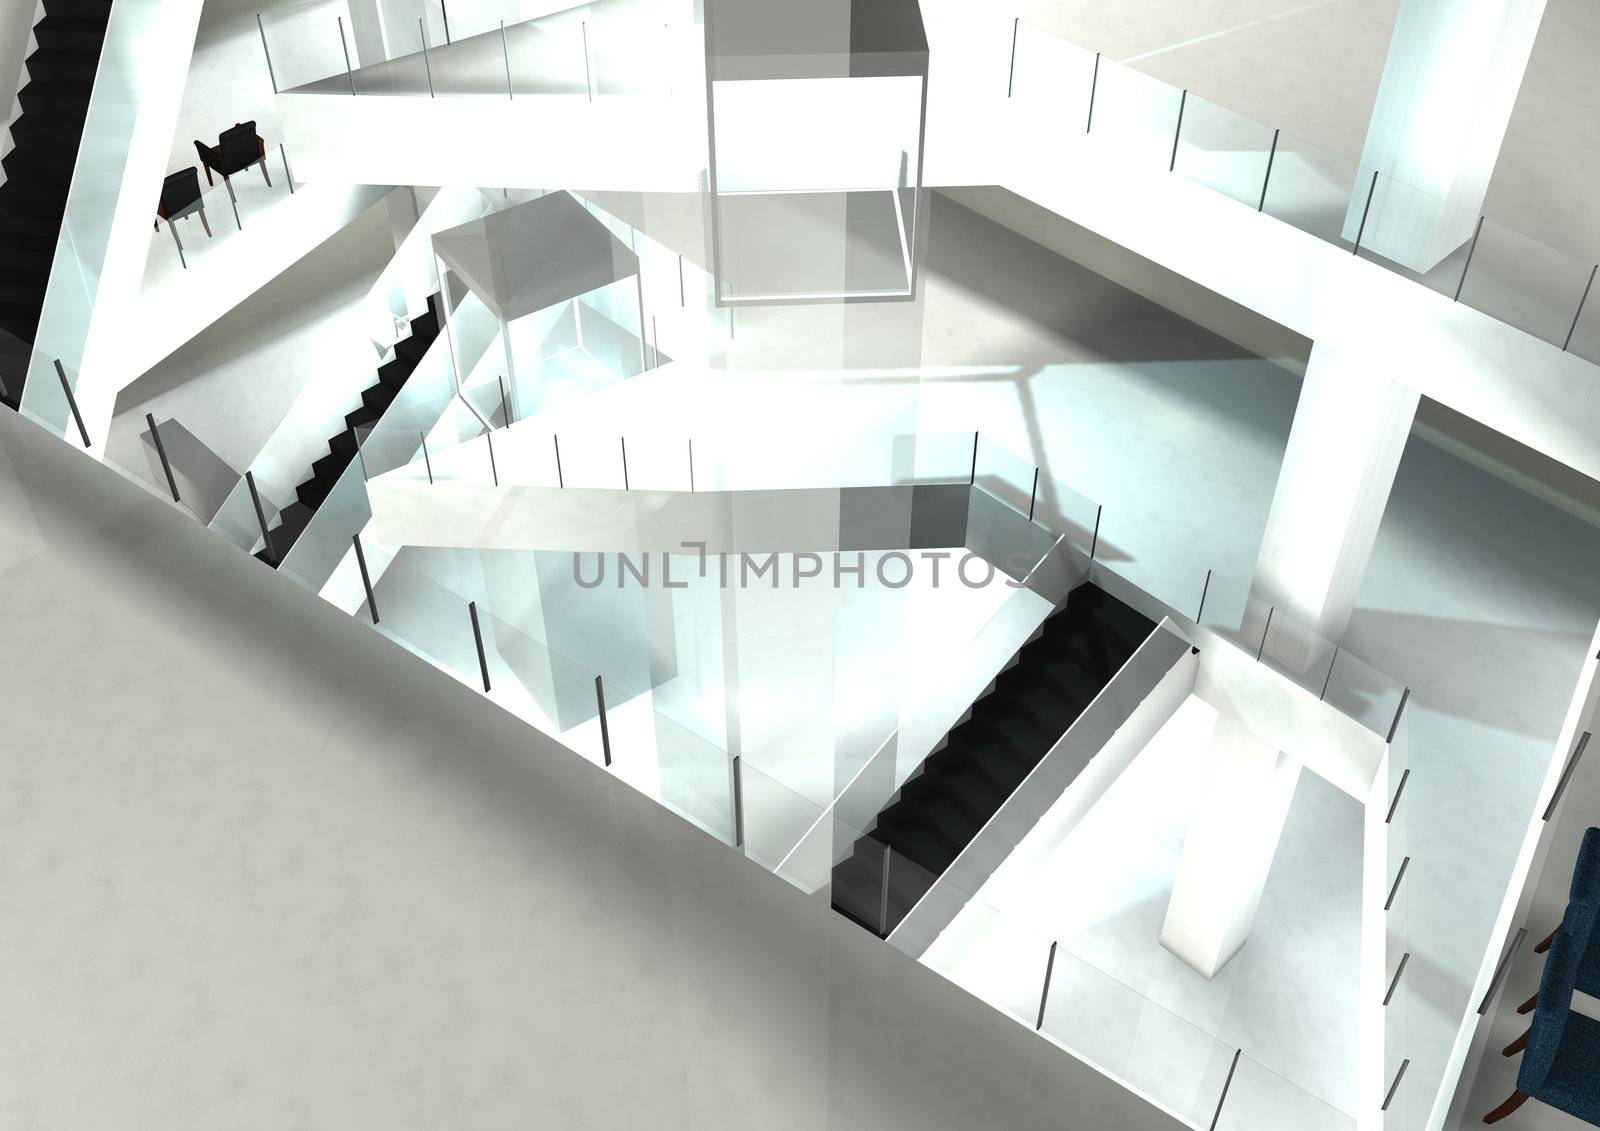 Mall interior design,illustrated 3d render show open-well